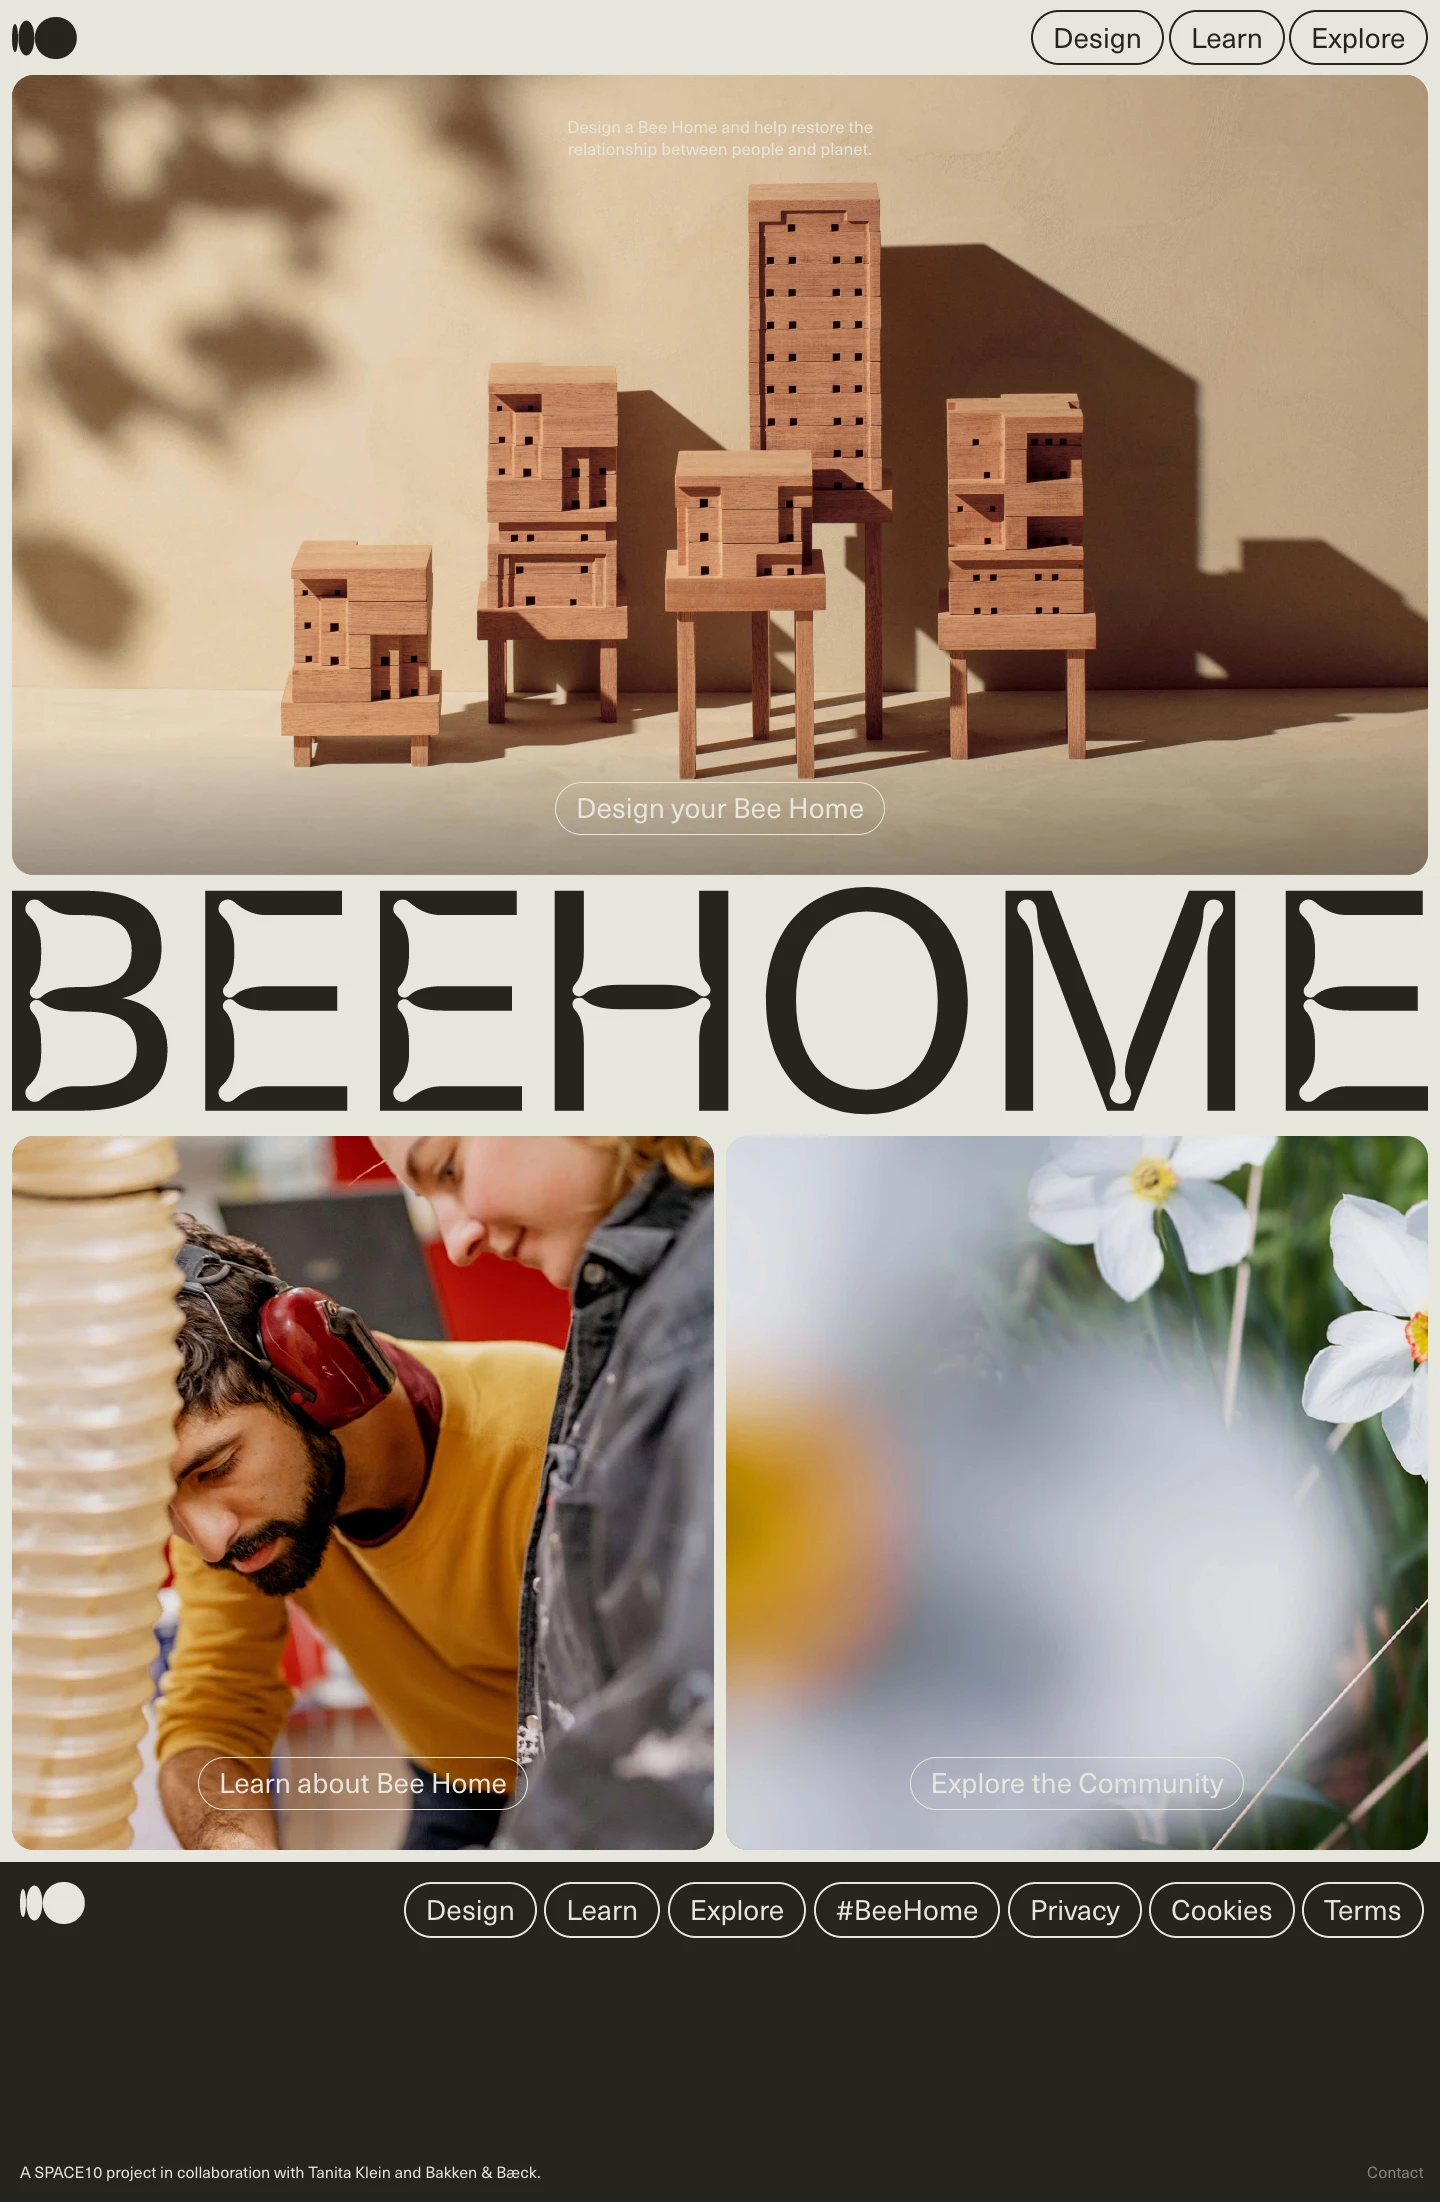 Bee Home Landing Page Example: An open-source design project inviting you to create a beautiful home for bees.